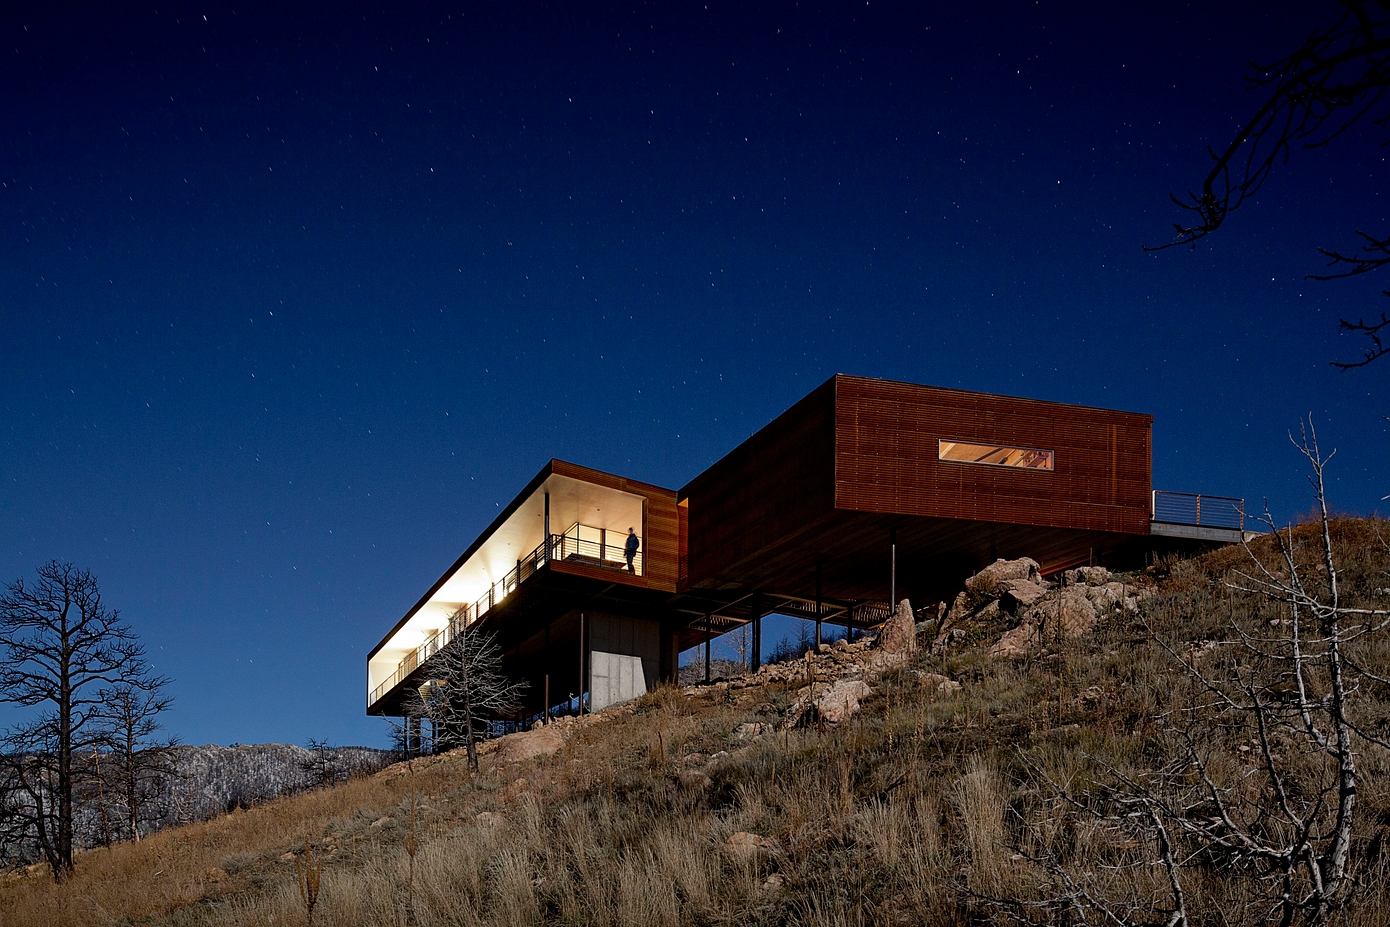 Sunshine Canyon: The Architectural Beauty of Resilience and Sustainability